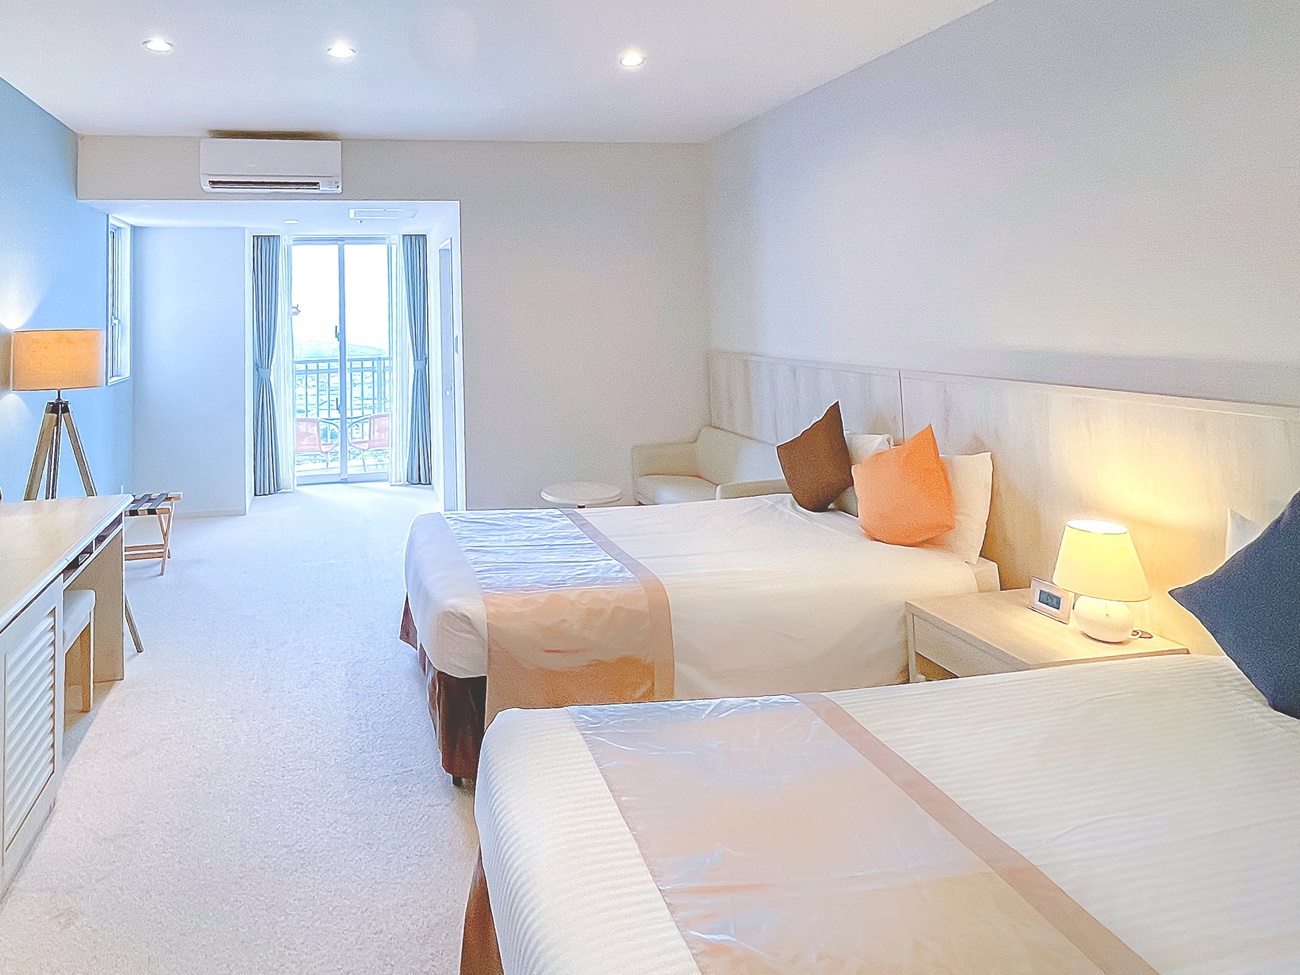 [Annex Building] Western-Style Deluxe Room - Ocean View【Non-smoking】